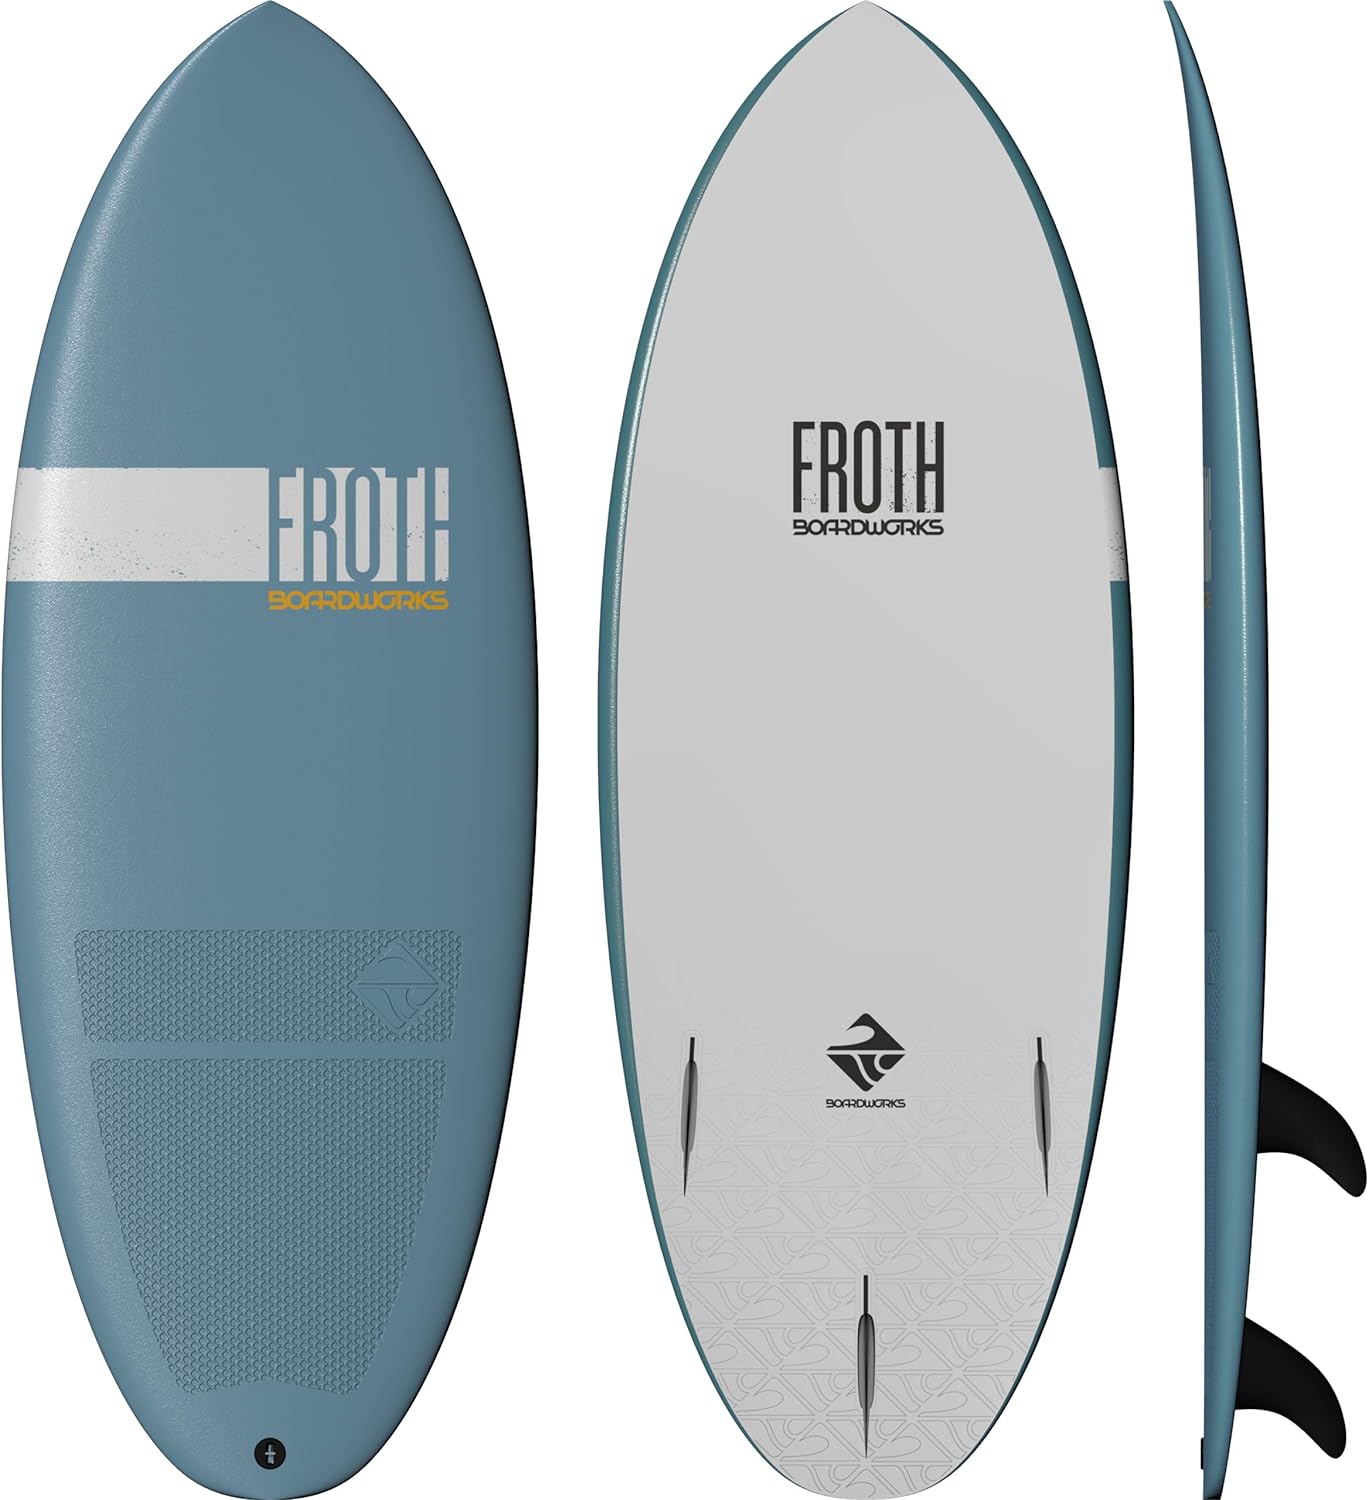 A Froth! surfboard designed for beginners to ride smaller waves, featuring the word Boardworks on its surface.